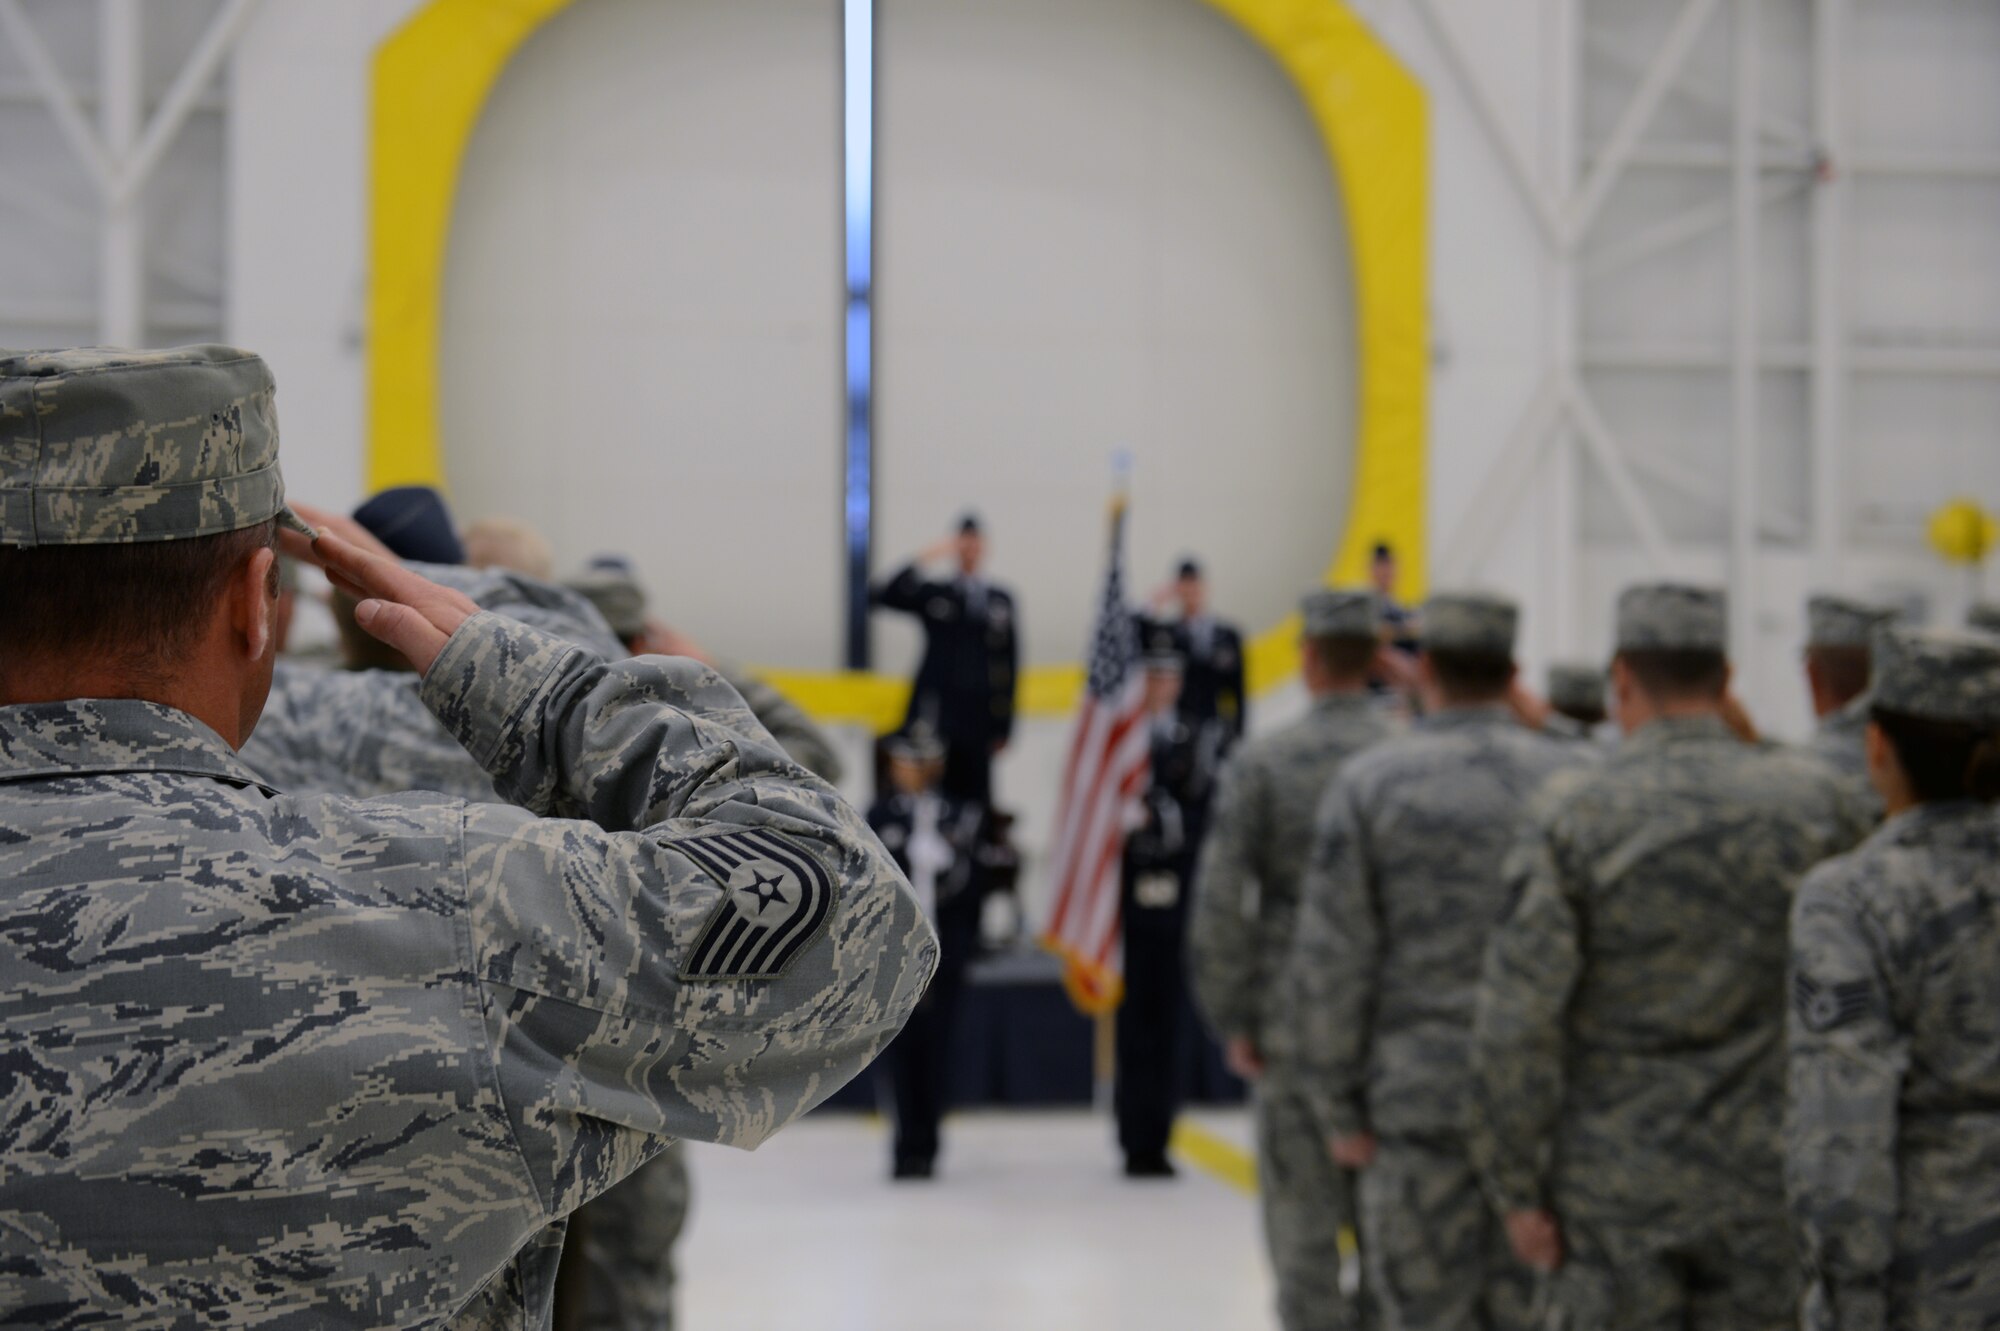 Attendees salute as the Team McChord Honor Guard post the colors during the 62nd Maintenance Operations Squadron Deactivation Ceremony May 13, 2013 at Joint Base Lewis-McChord, Wash. The 62nd MOS traces its roots back to World War II, and  was originally constituted as the 62nd Station Complement Squadron on May 15, 1943 at Walterboro Army Air Field, S.C. (U.S. Air Force photo/Staff Sgt. Jason Truskowski)